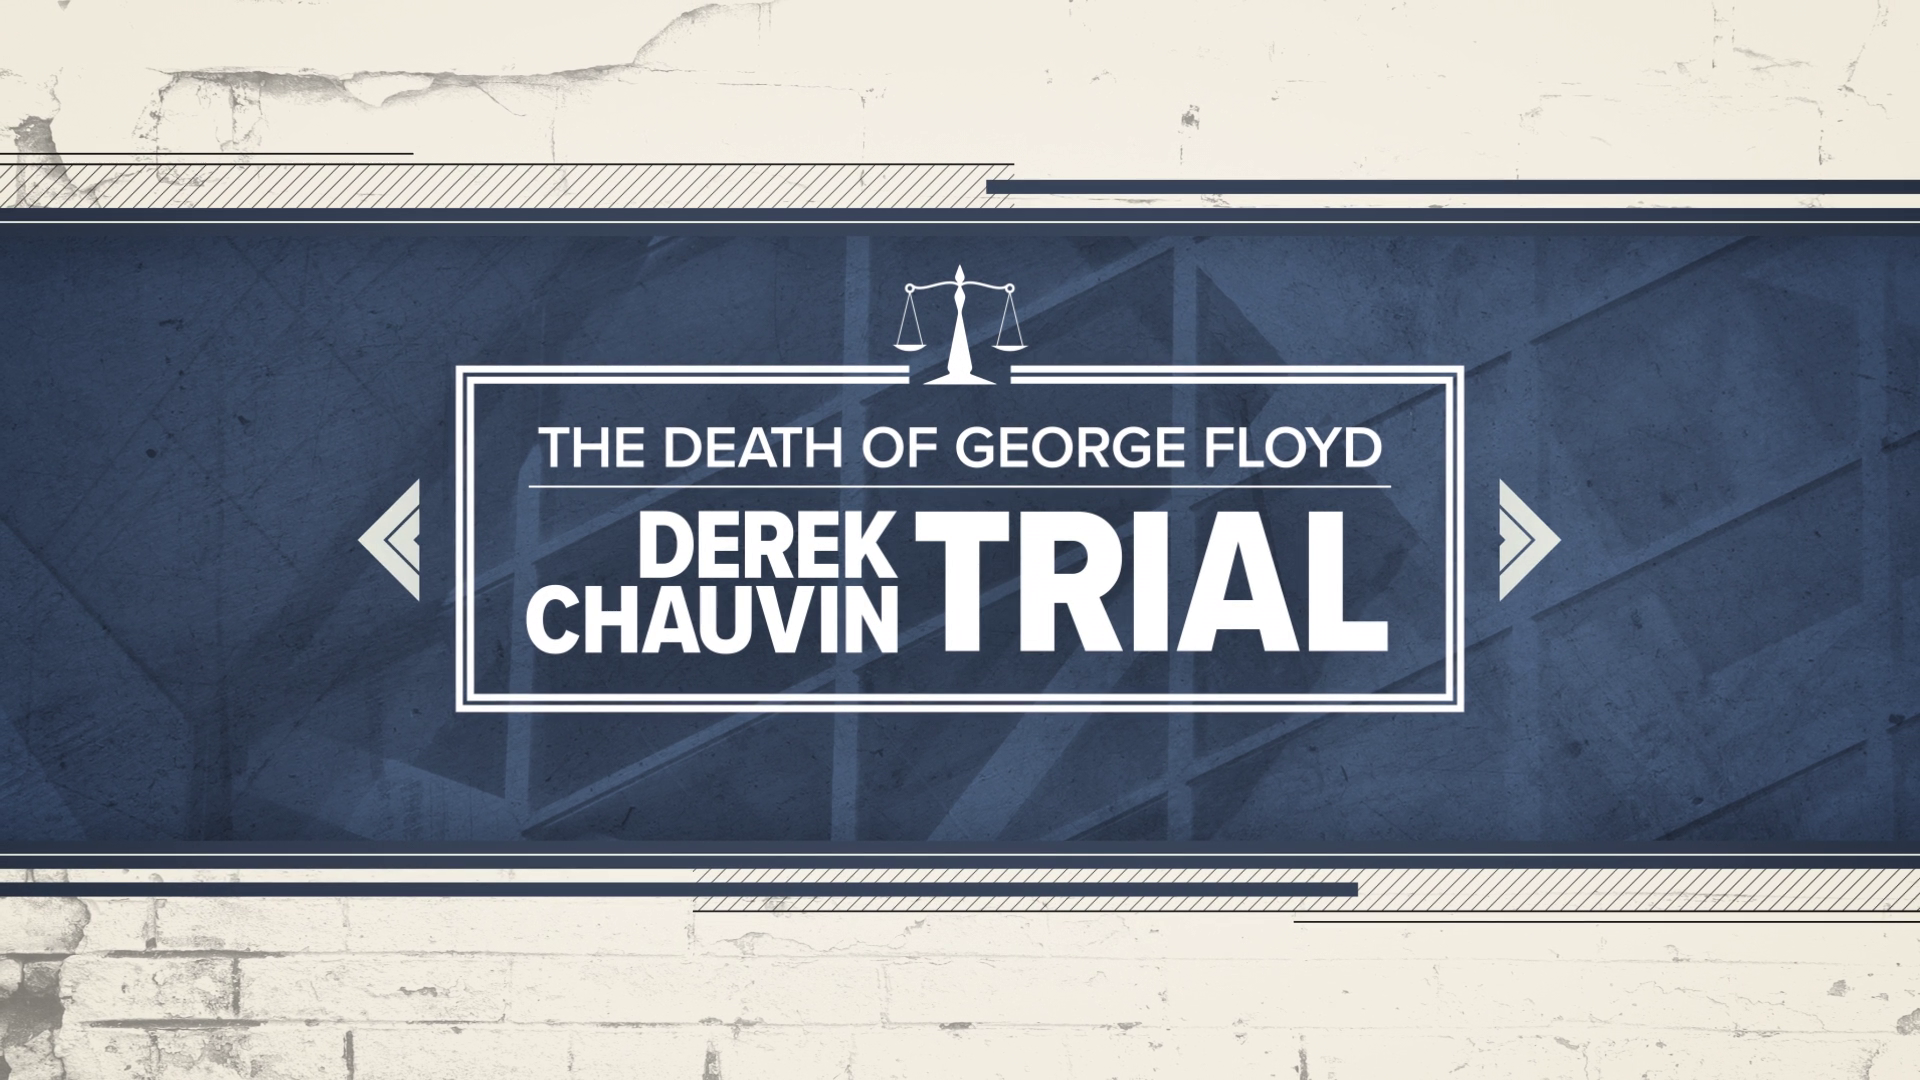 The question of Chauvin's guilt in George Floyd's death is now in the hands of the jury. Mary Moriarty weighs in.